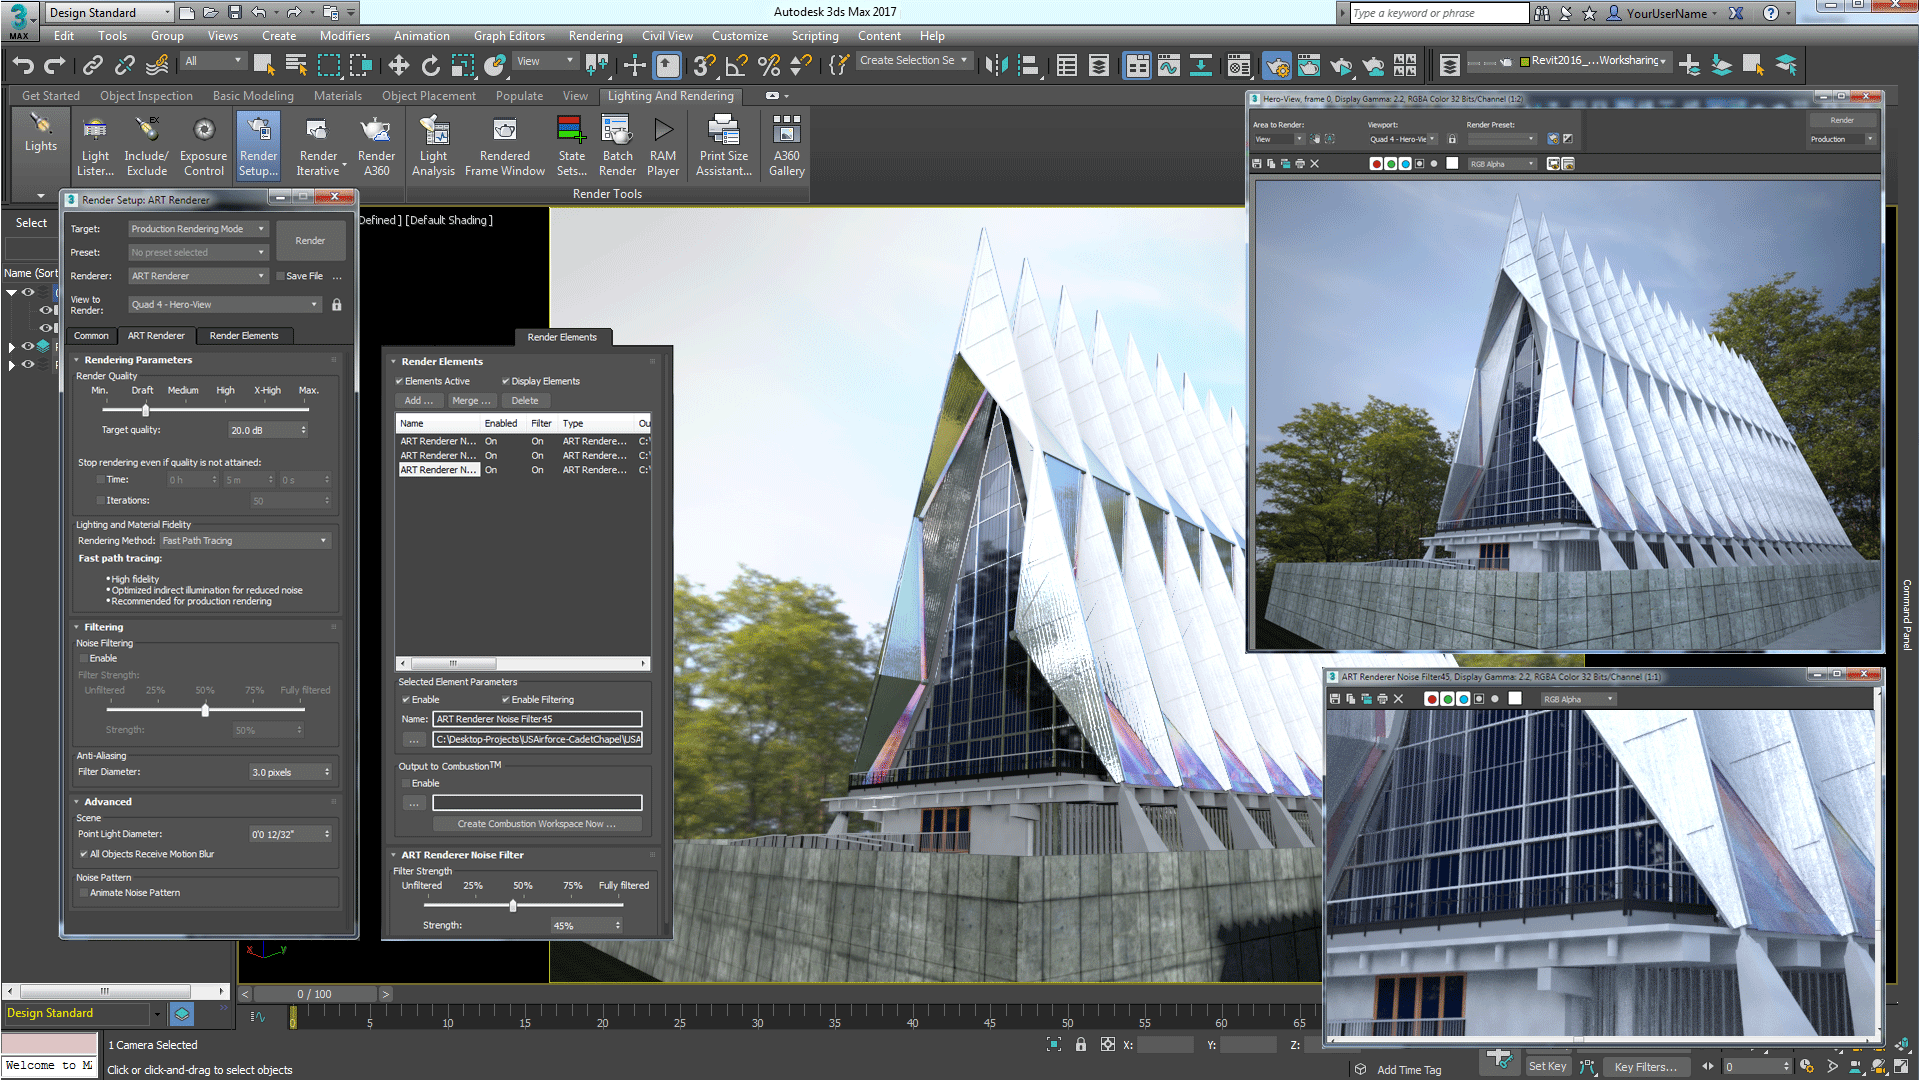 Giao diện của Autodesk 3Ds Max